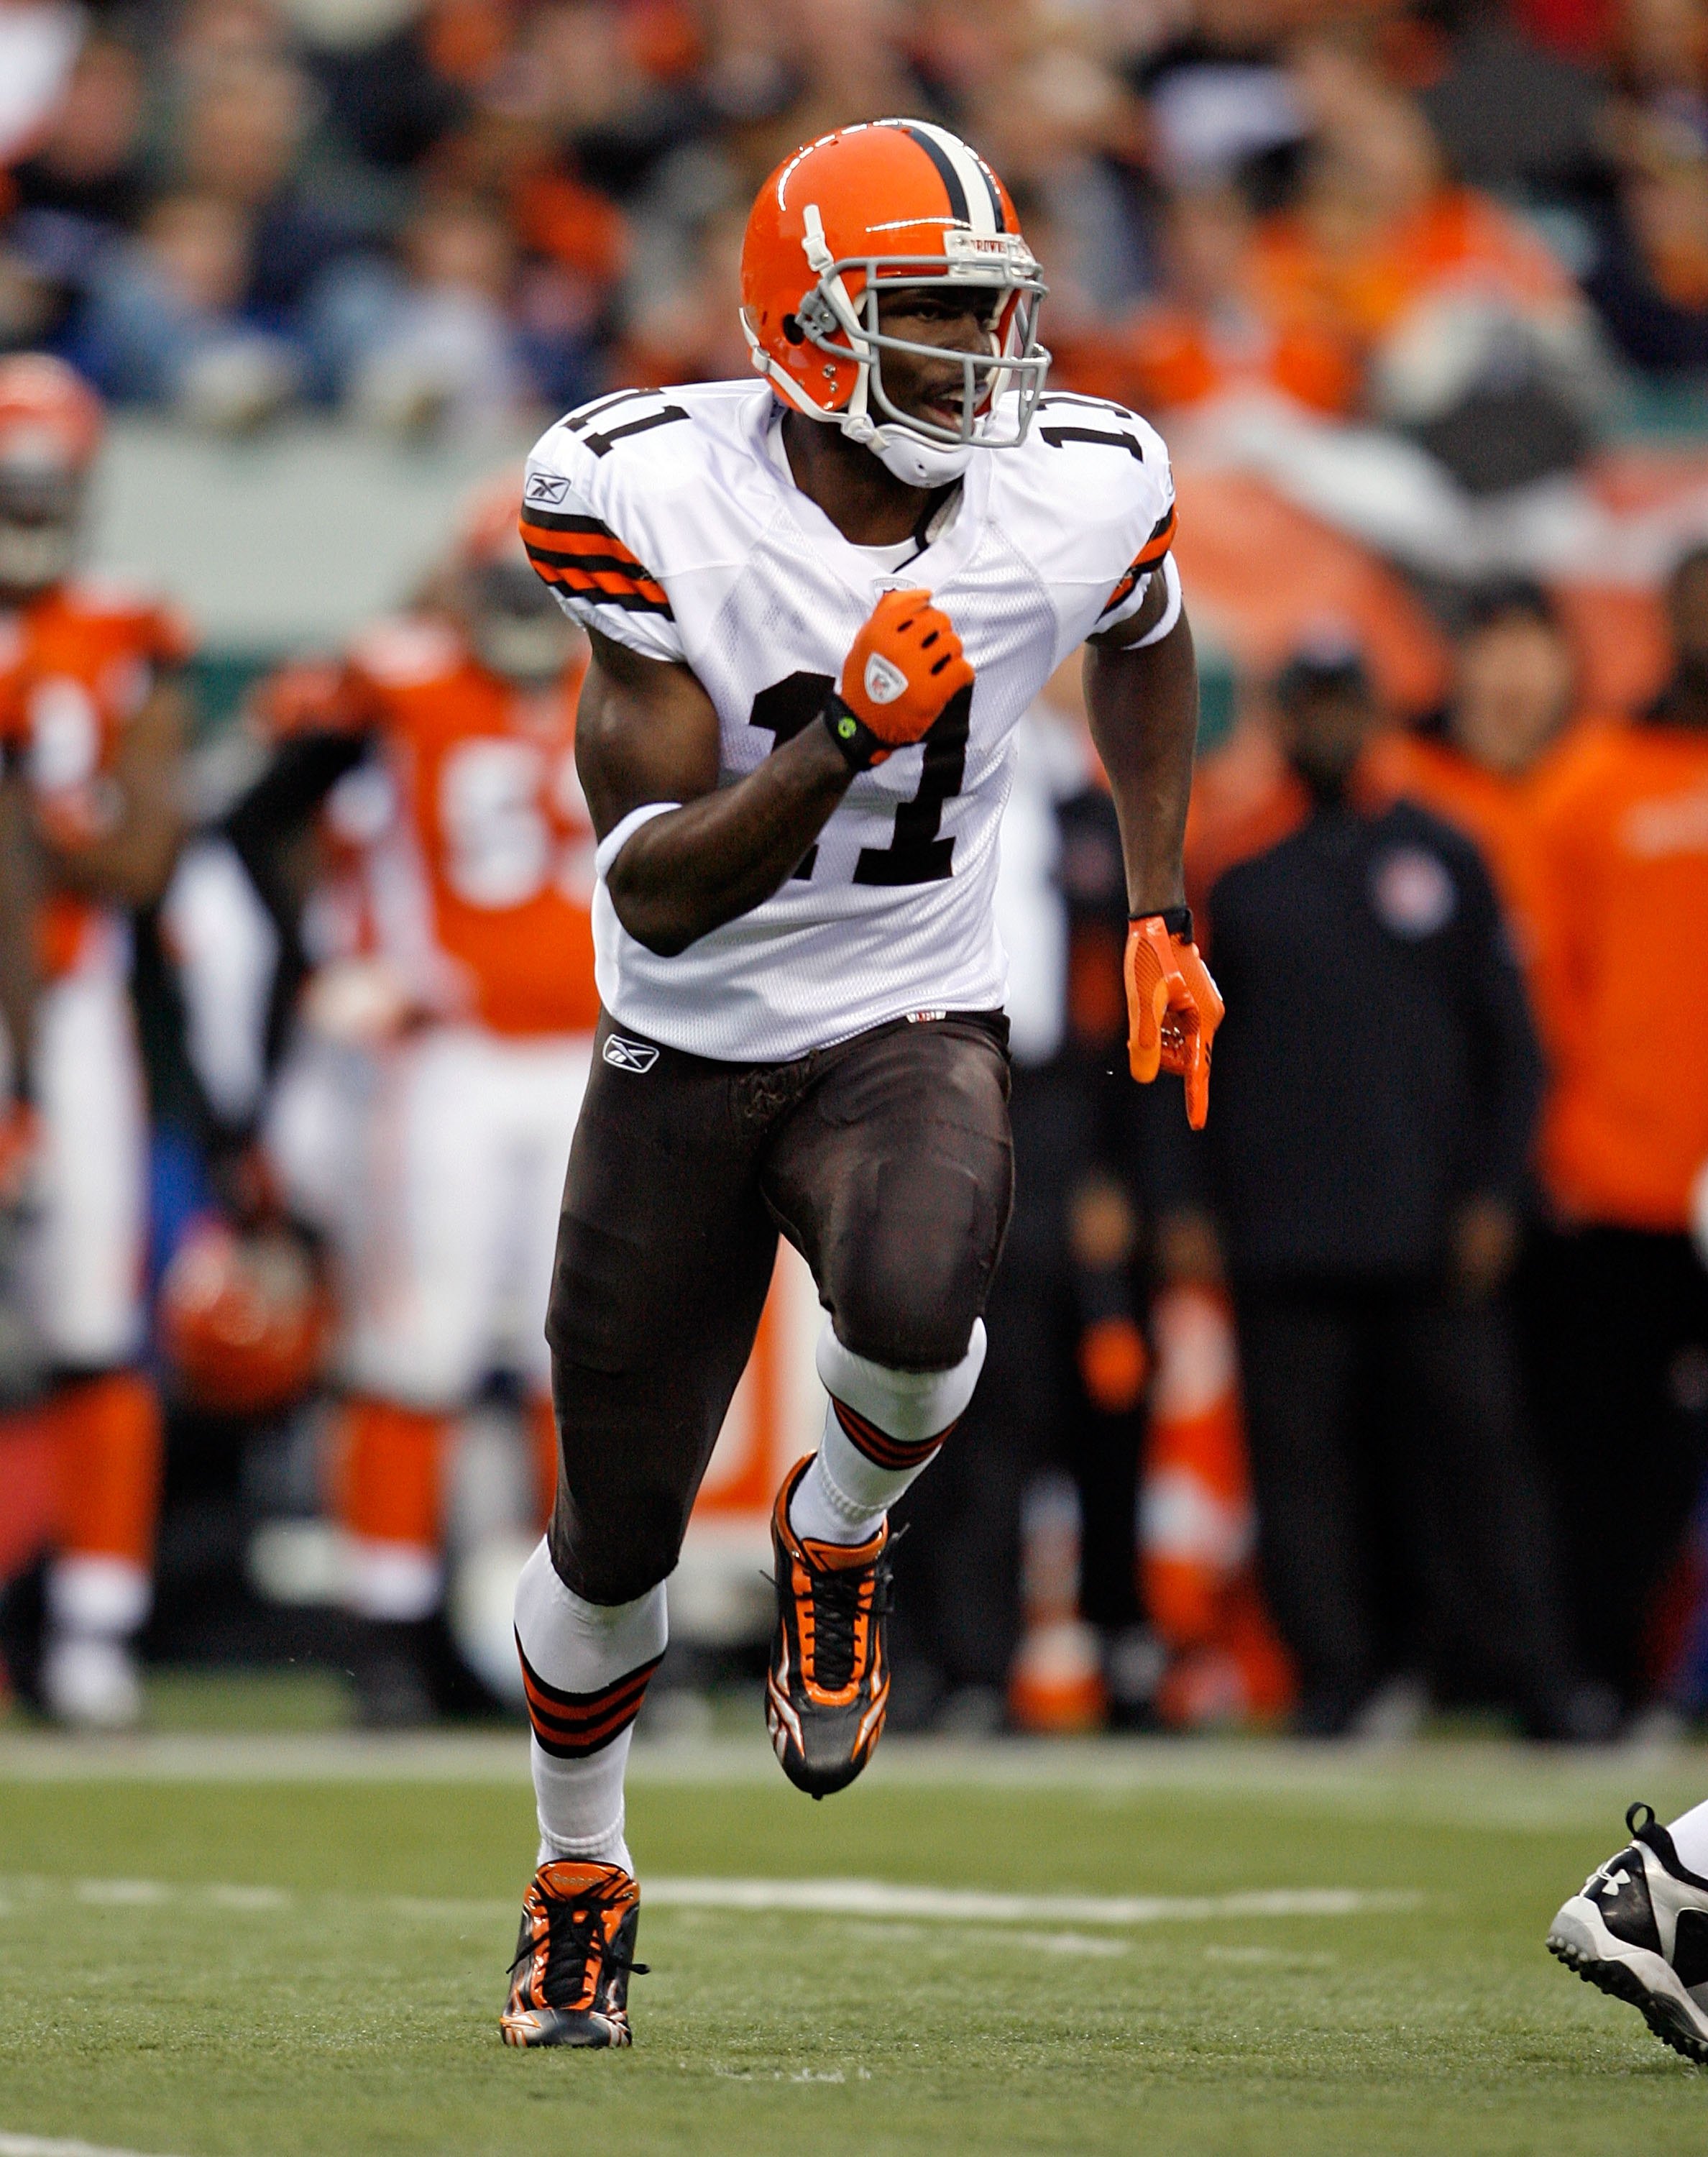 CINCINNATI - NOVEMBER 29:  Mohamed Massaquoi #11 of  the Cleveland Browns runs during the NFL game against the Cincinnati Bengals at Paul Brown Stadium on November 29, 2009 in Cincinnati, Ohio.  (Photo by Andy Lyons/Getty Images)